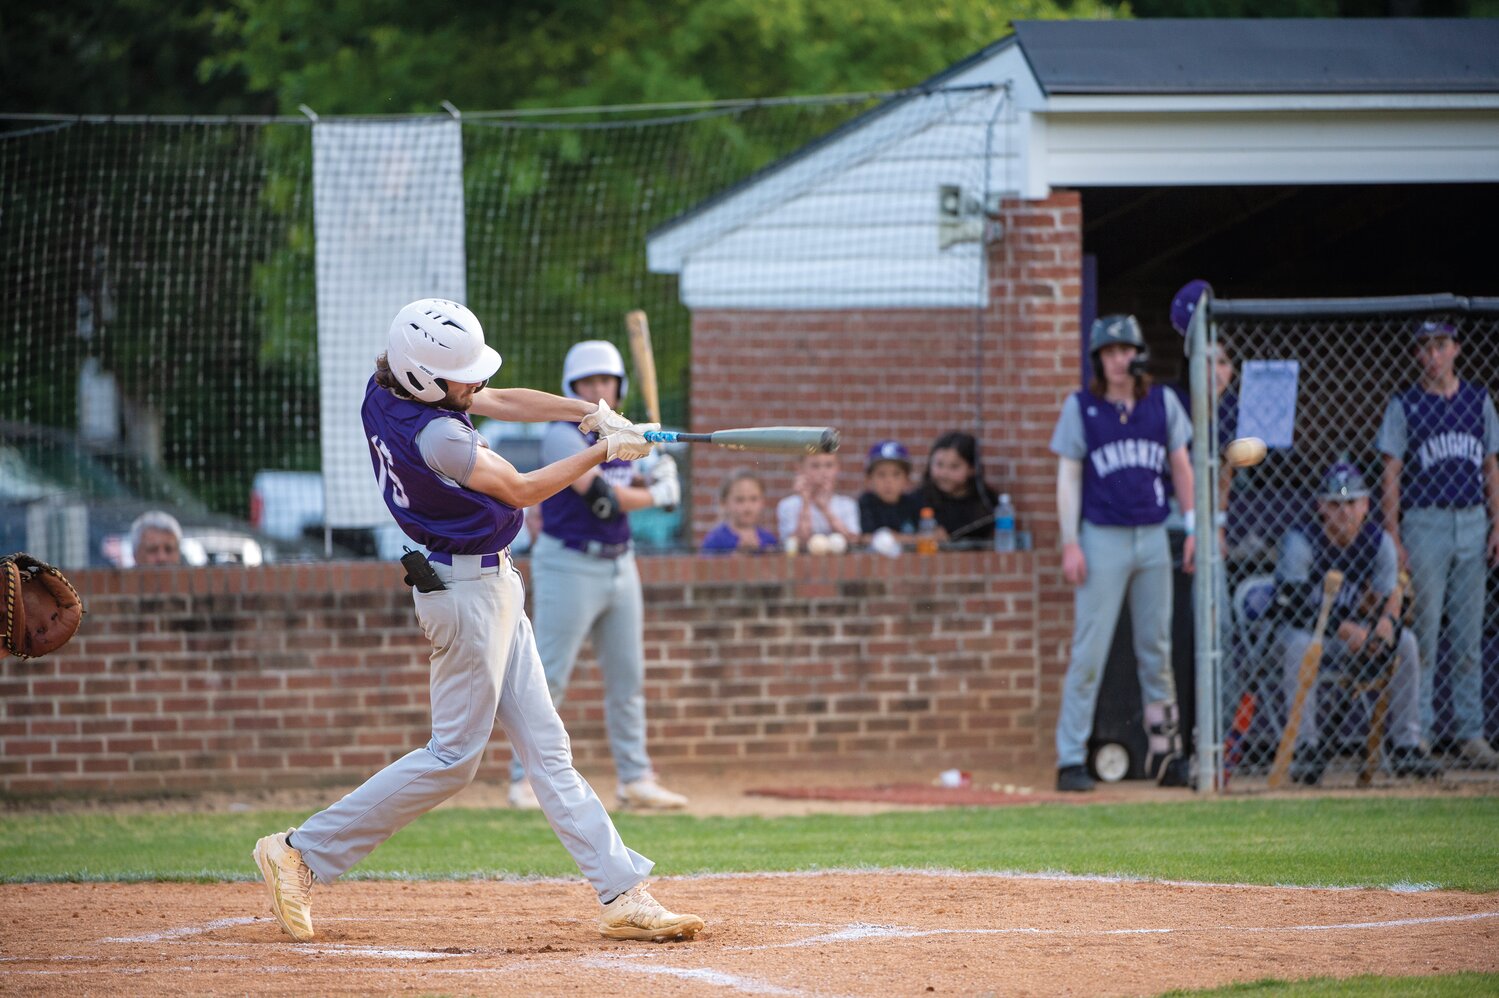 Chatham Charter sophomore Zach Cartrette was 2-for-4 with two RBI in a playoff win over Chatham Central last Friday.